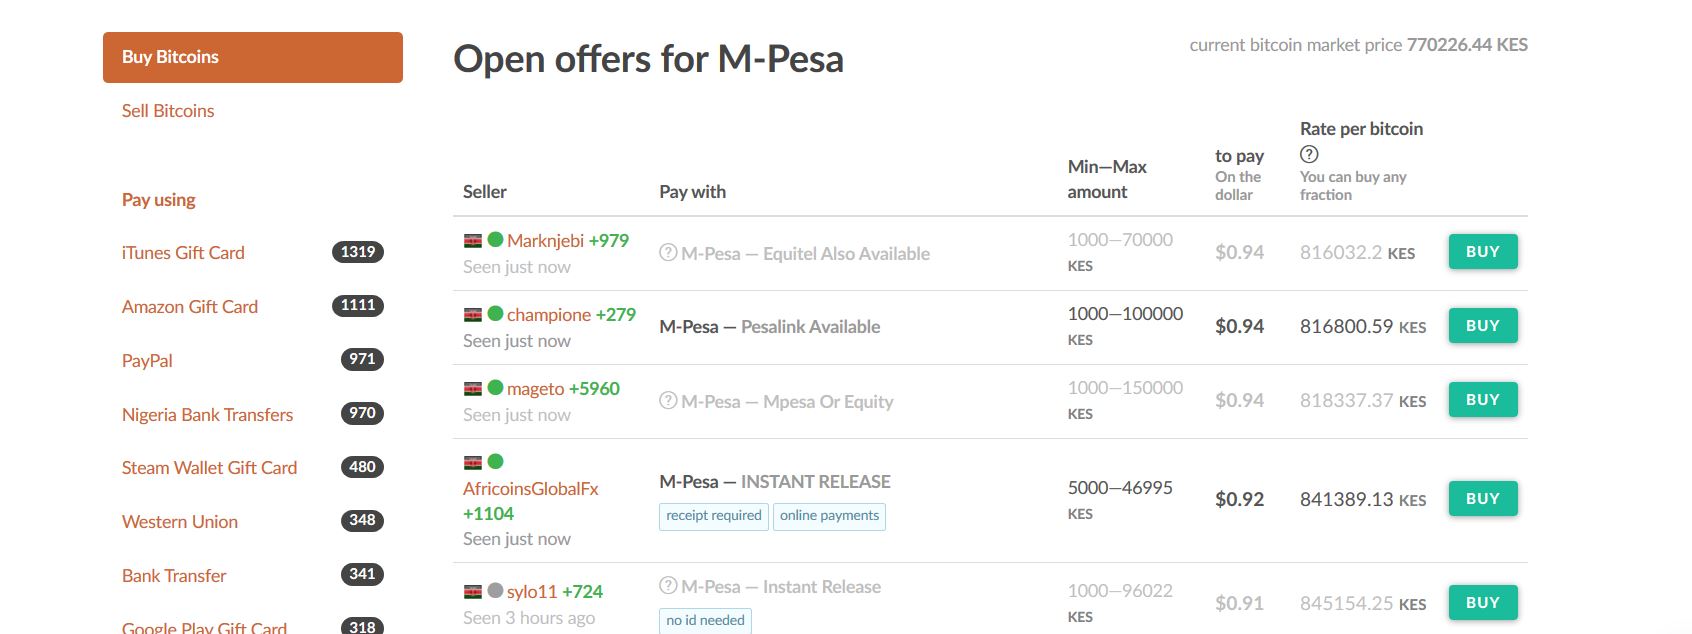 Paxful Kenya B!   uy And Sell Bitcoins With Mpesa How It Works - 